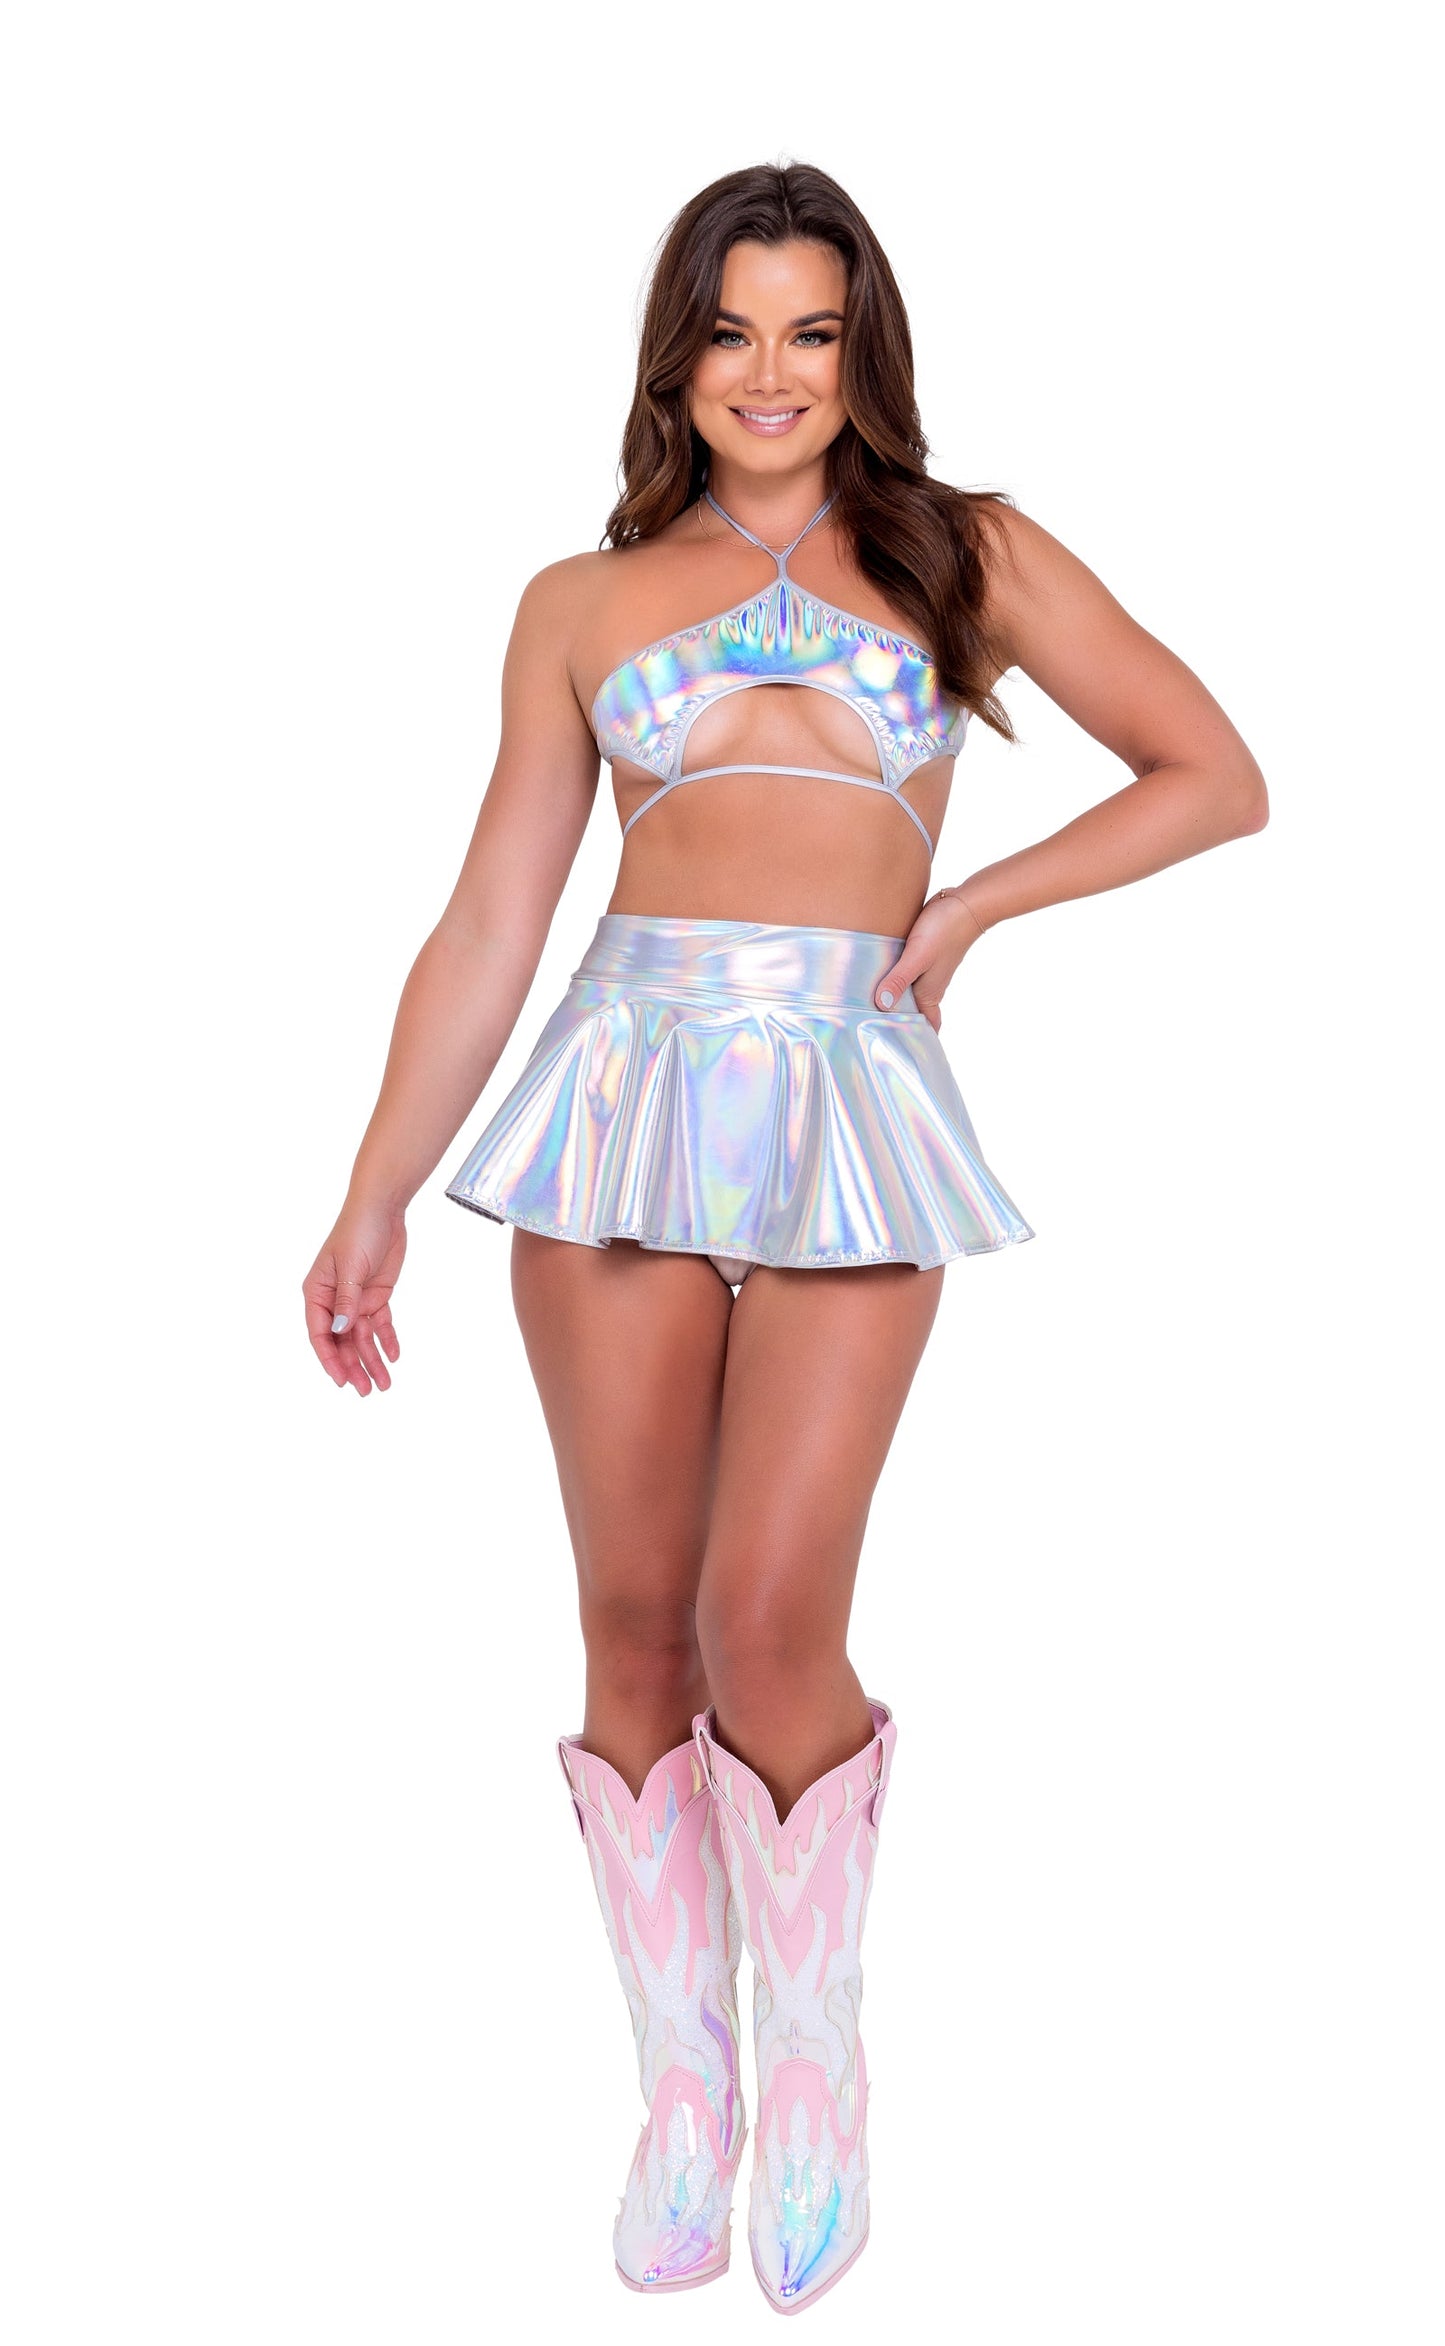 Holographic Keyhole Tie Top- 70% OFF